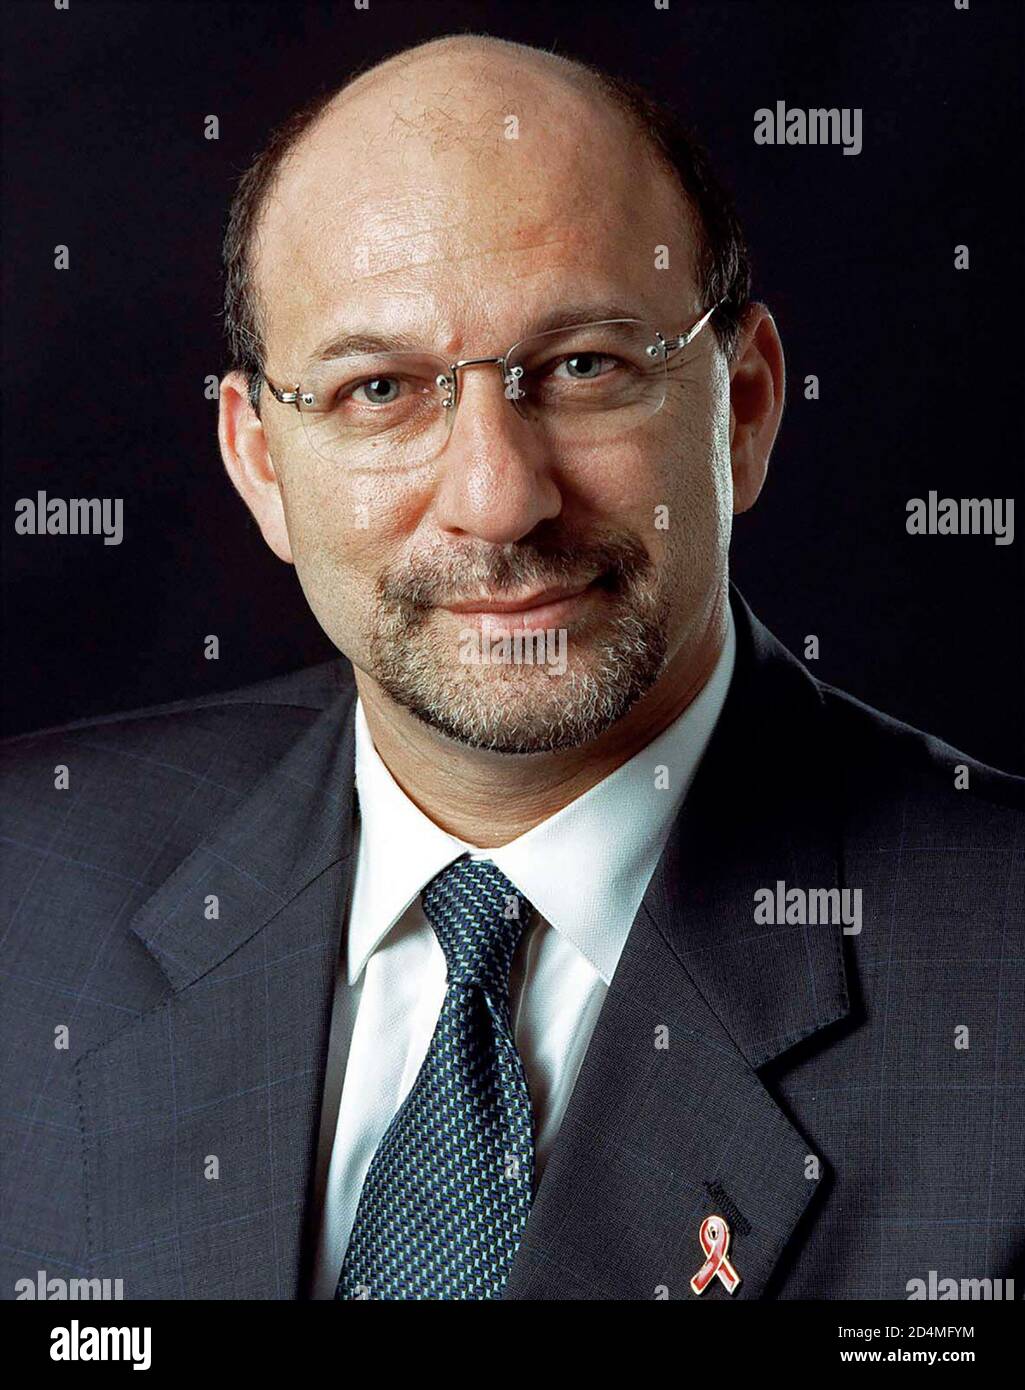 Trevor Manuel Development Committee Chairman Minister of Finance South Africa Stock Photo